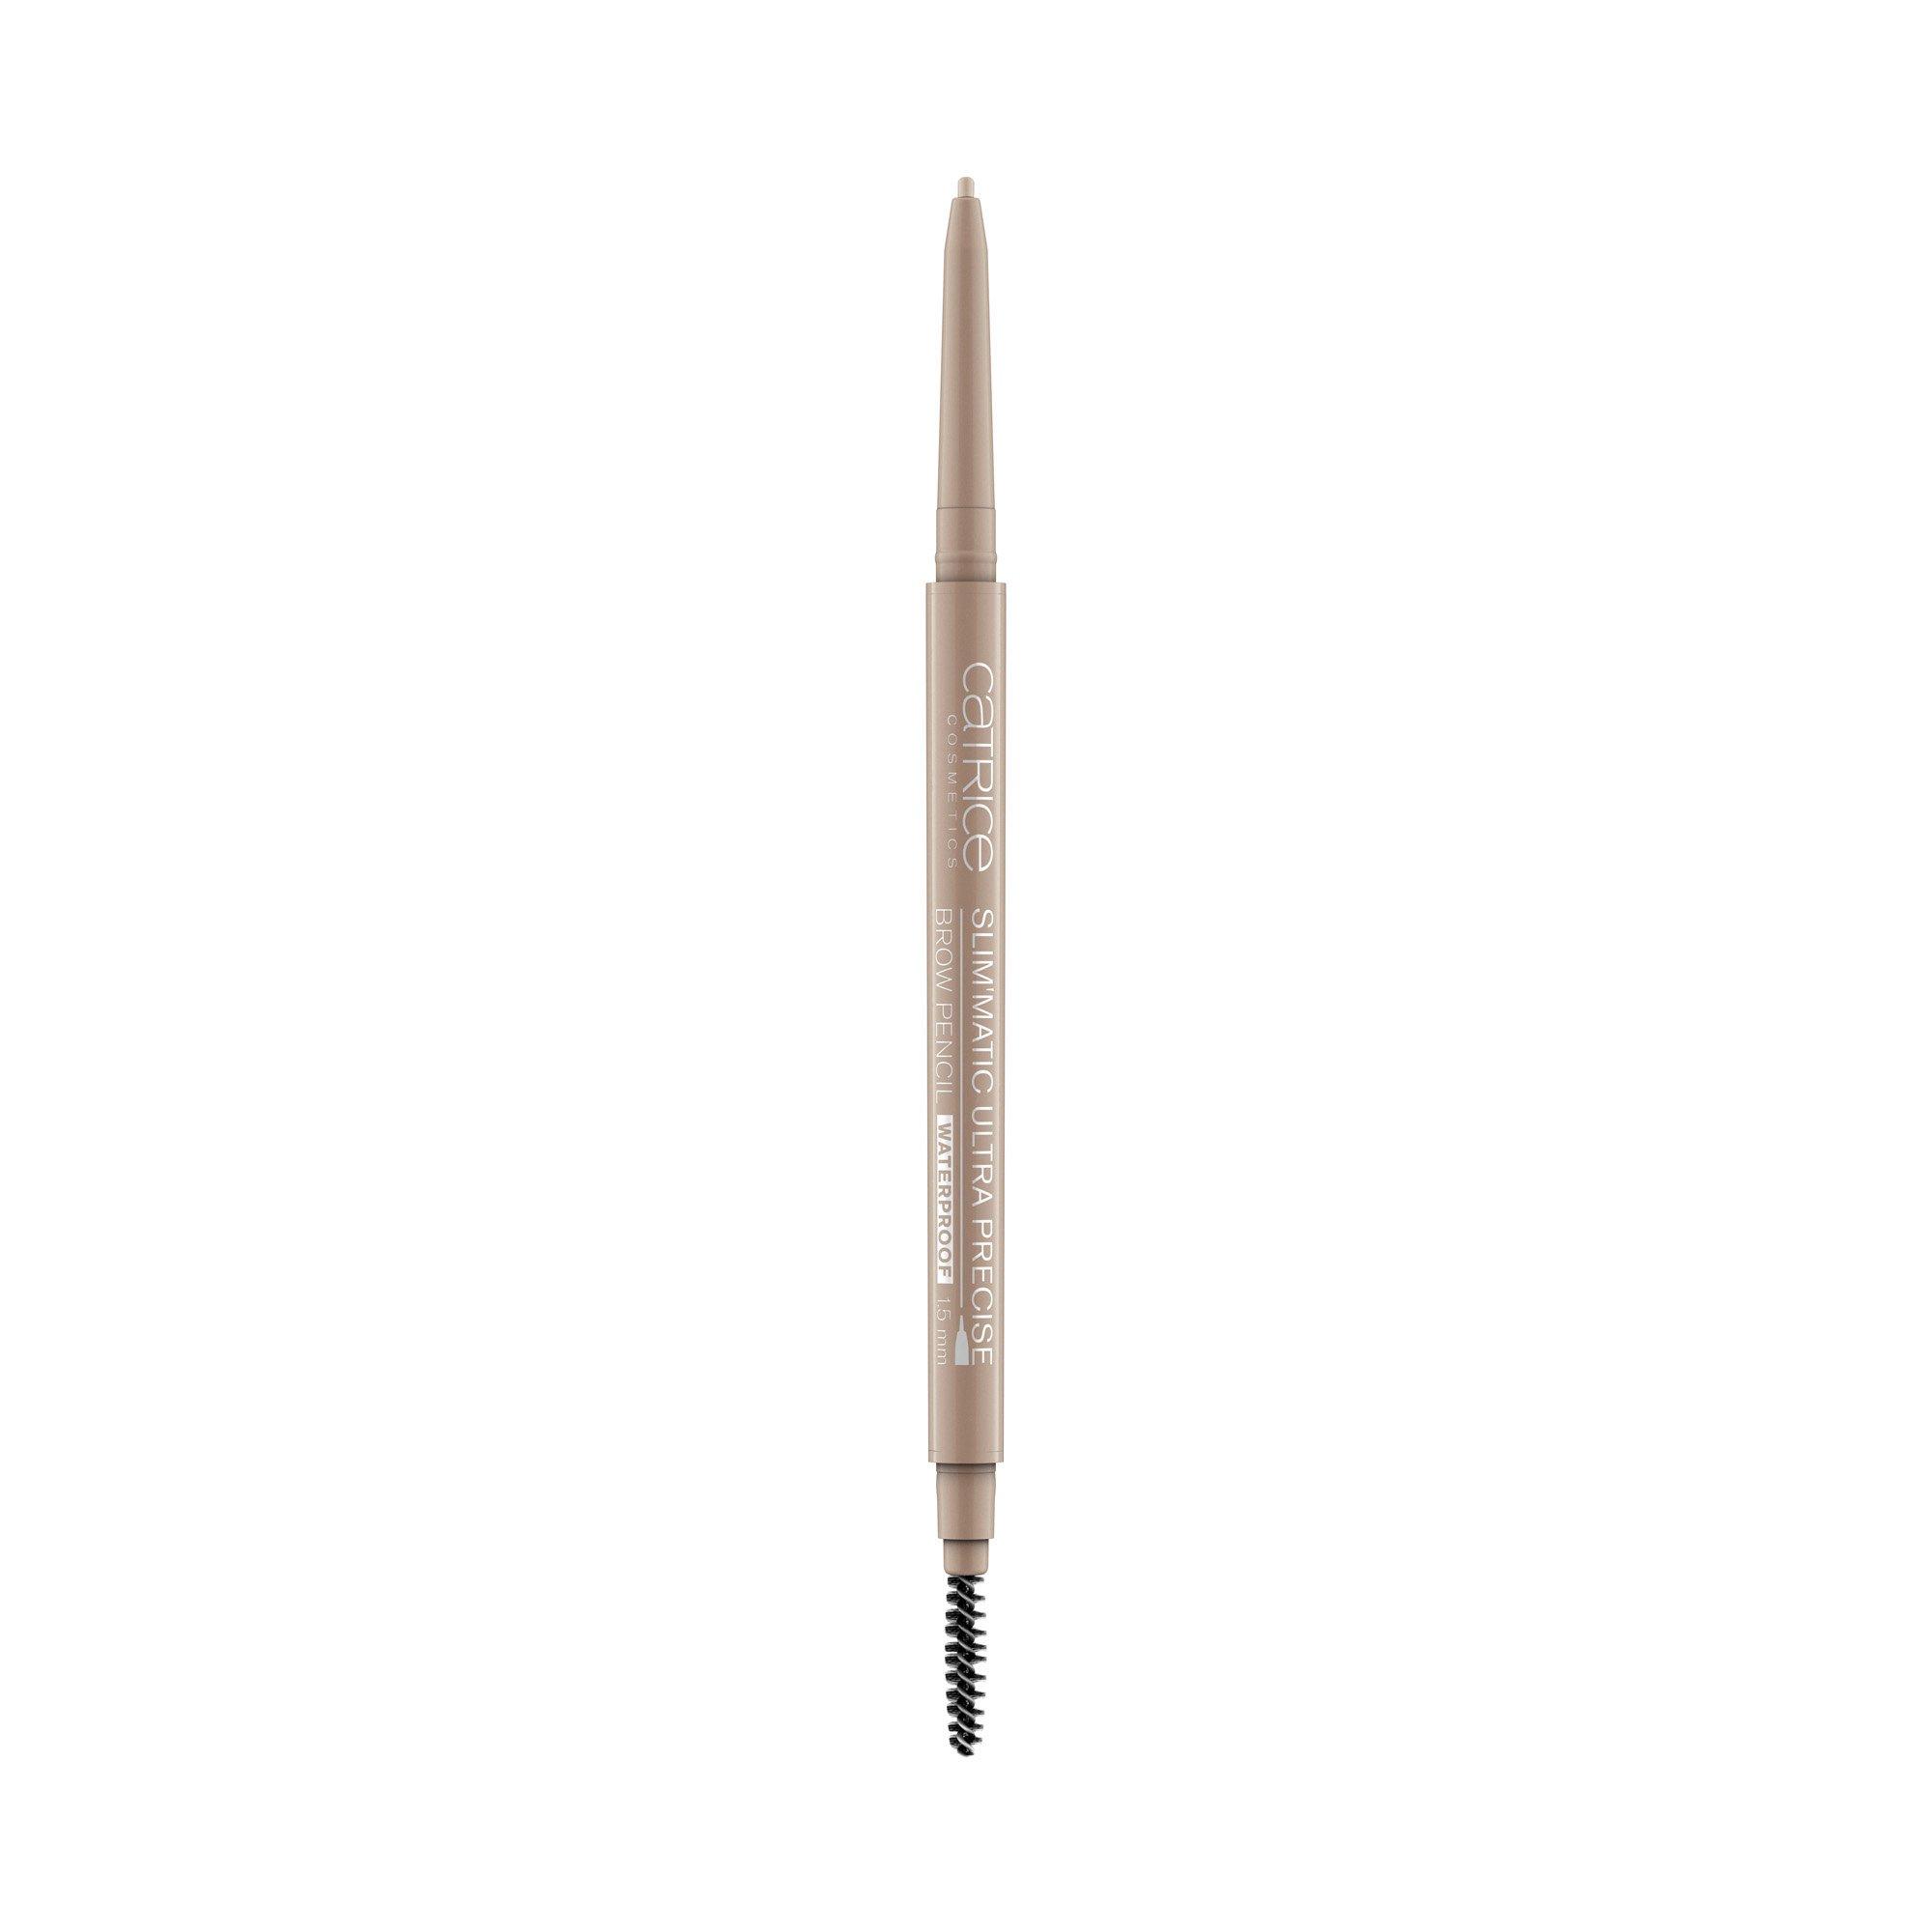 Image of CATRICE Slim'Matic Ultra Precise Brow Pencil Waterproof - 0.05G